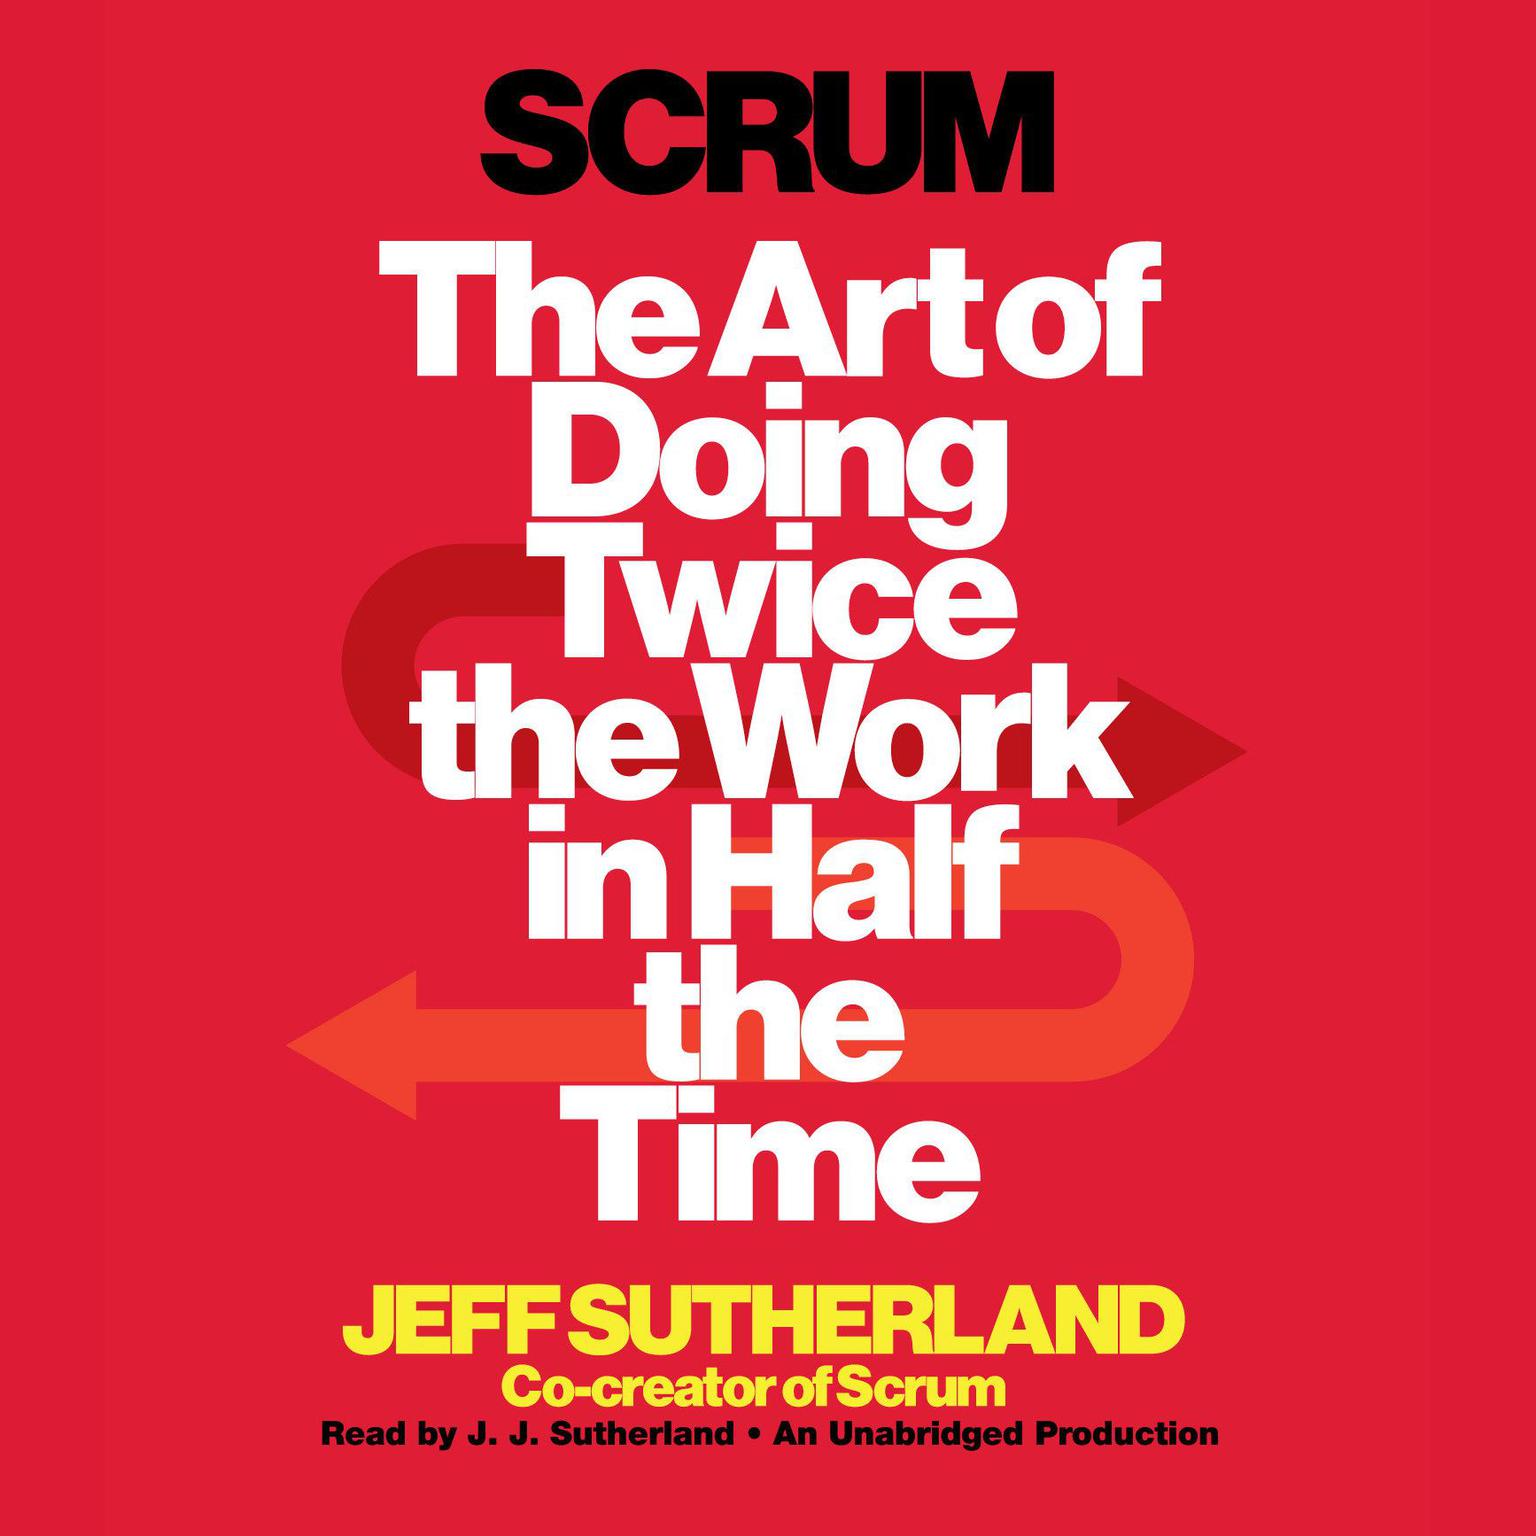 Scrum: The Art of Doing Twice the Work in Half the Time Audiobook, by Jeff Sutherland